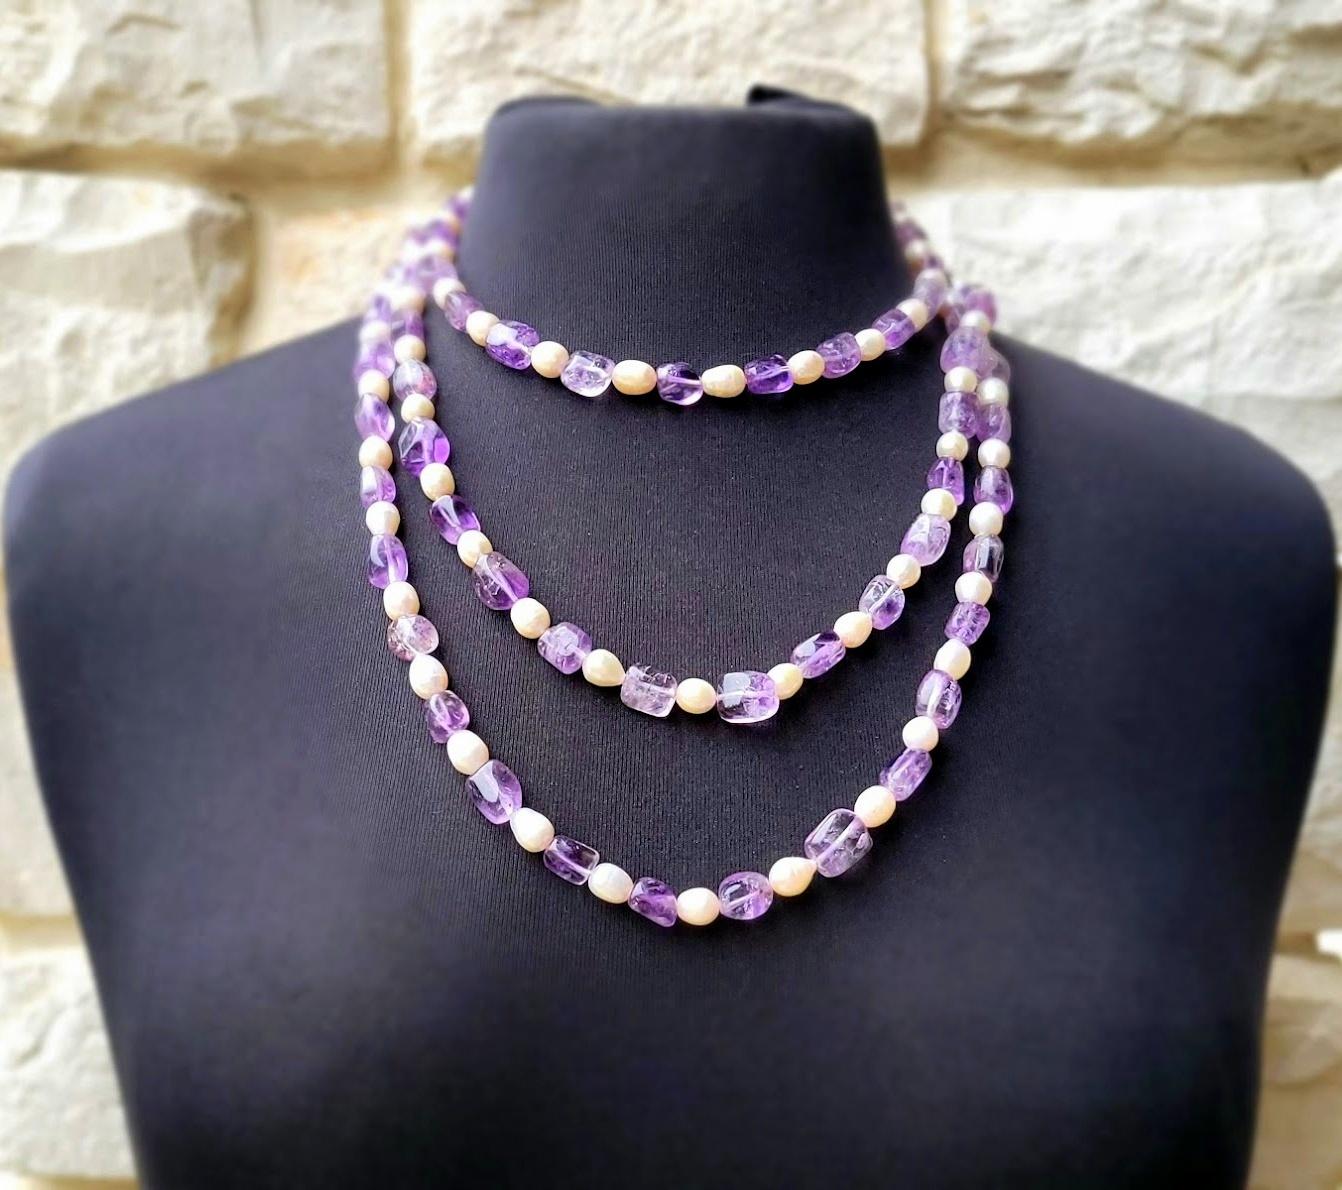 Introducing our elegant long necklace, made of natural freshwater pearls and natural lavender amethyst in the classic Art Deco style of 20-40 years ago.

The necklace measures an impressive 66 inches (167.6 cm) in length and features